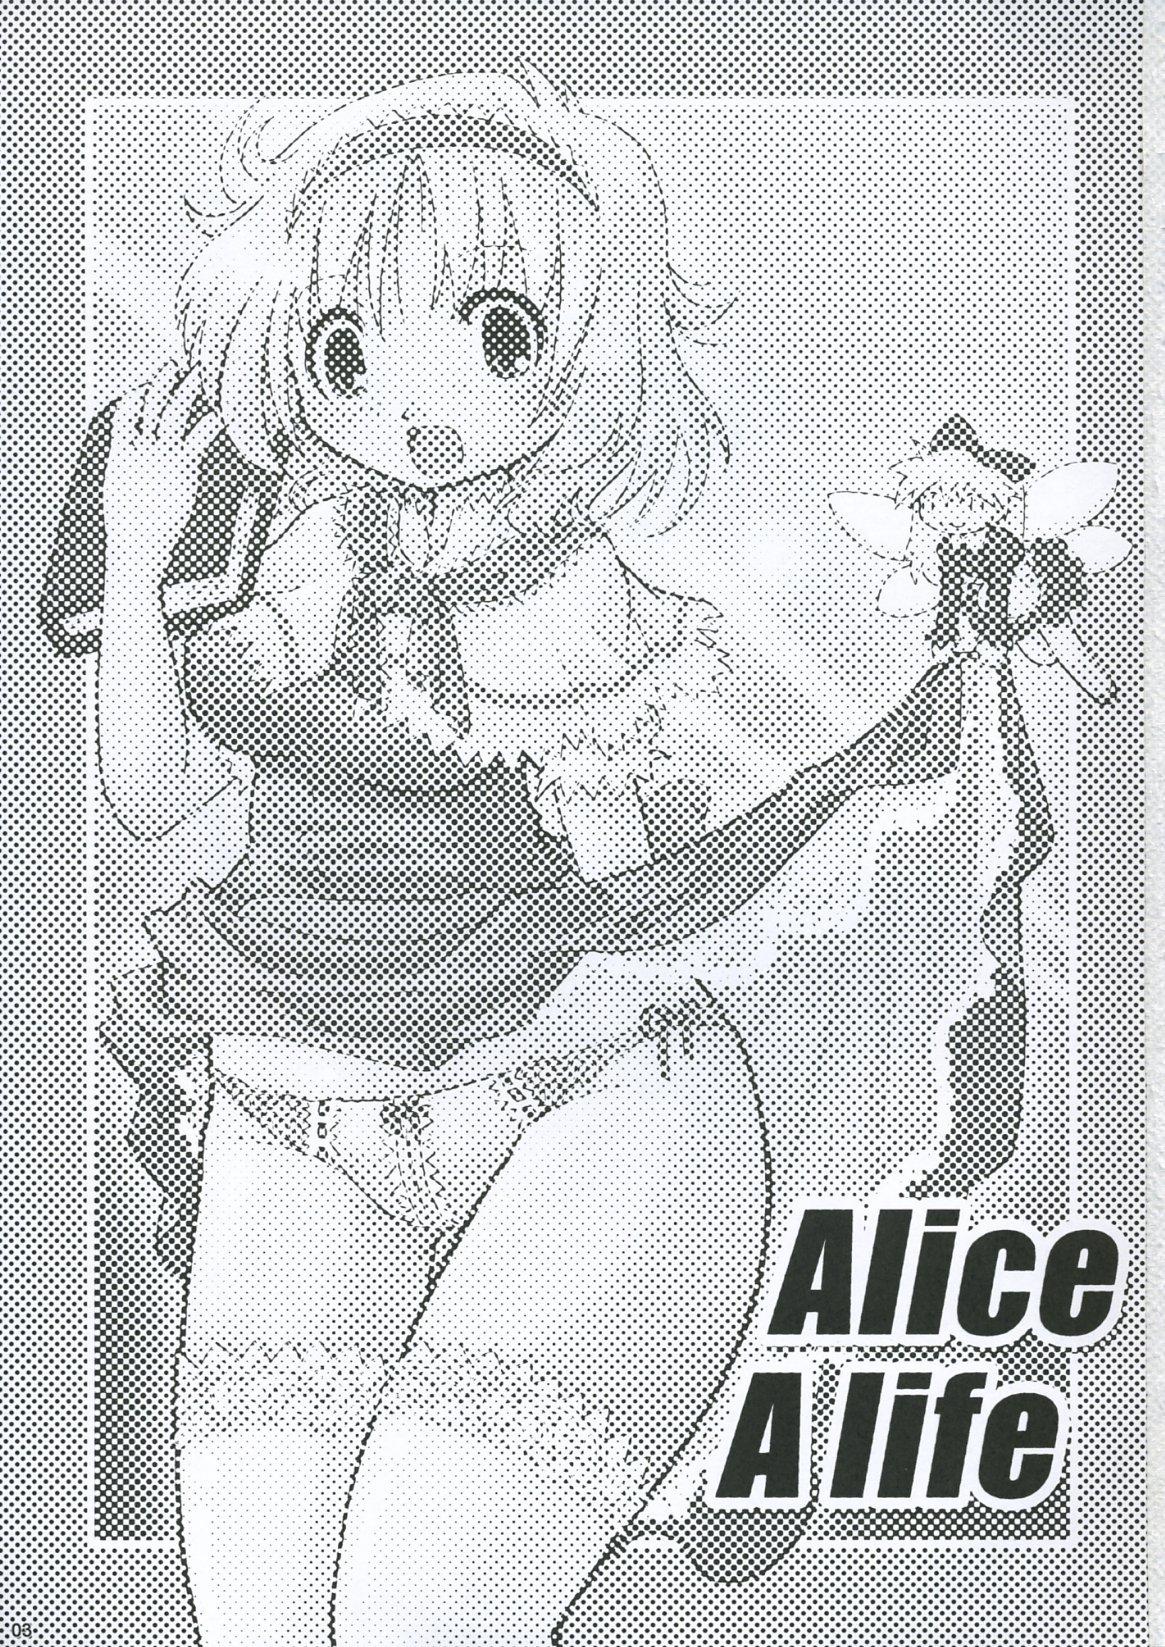 Longhair Alice A life - Touhou project Old Man - Page 2